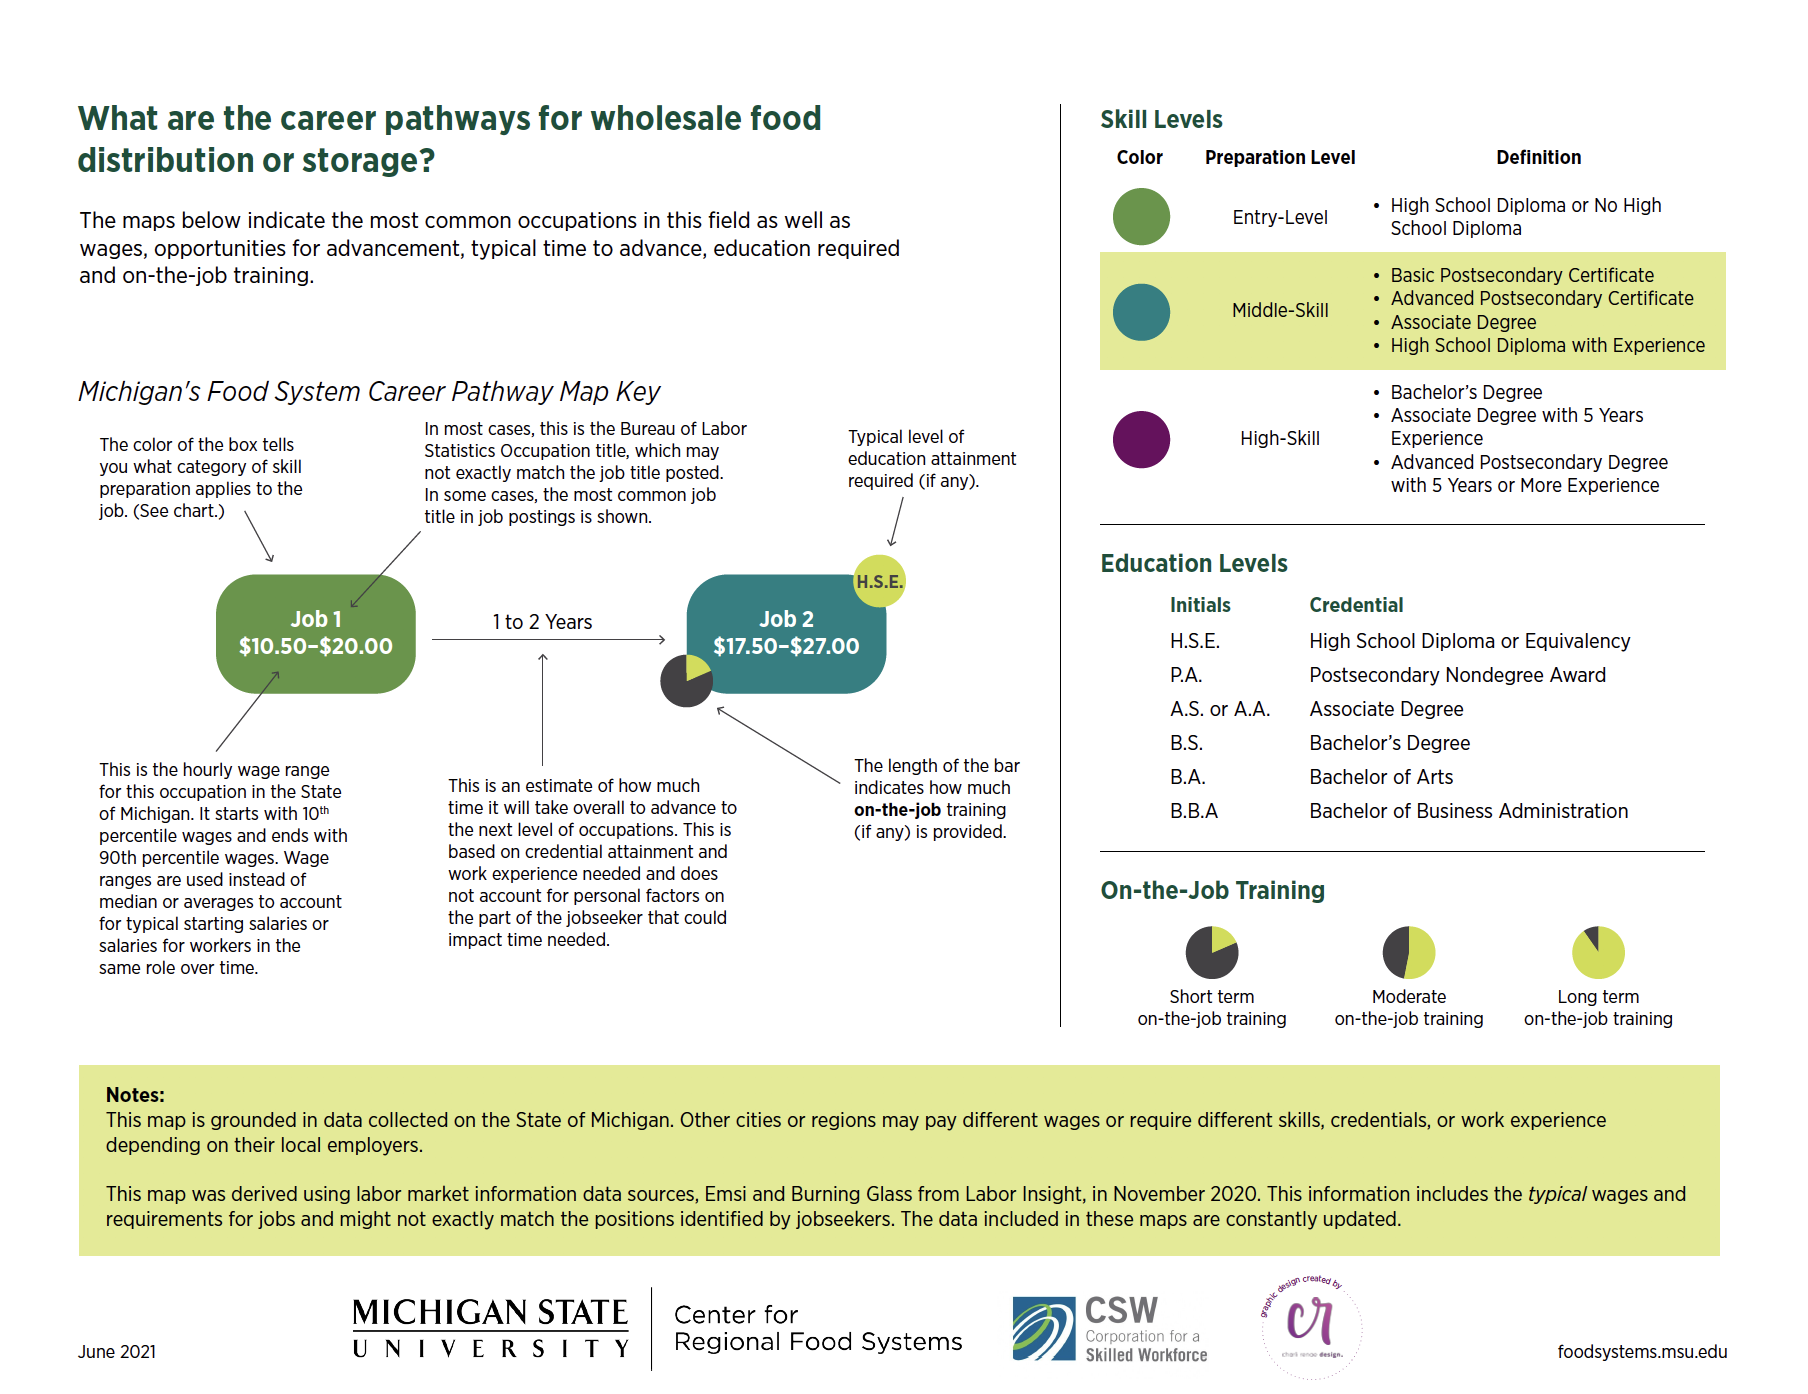 This key describes what the elements of the career pathway maps mean. 